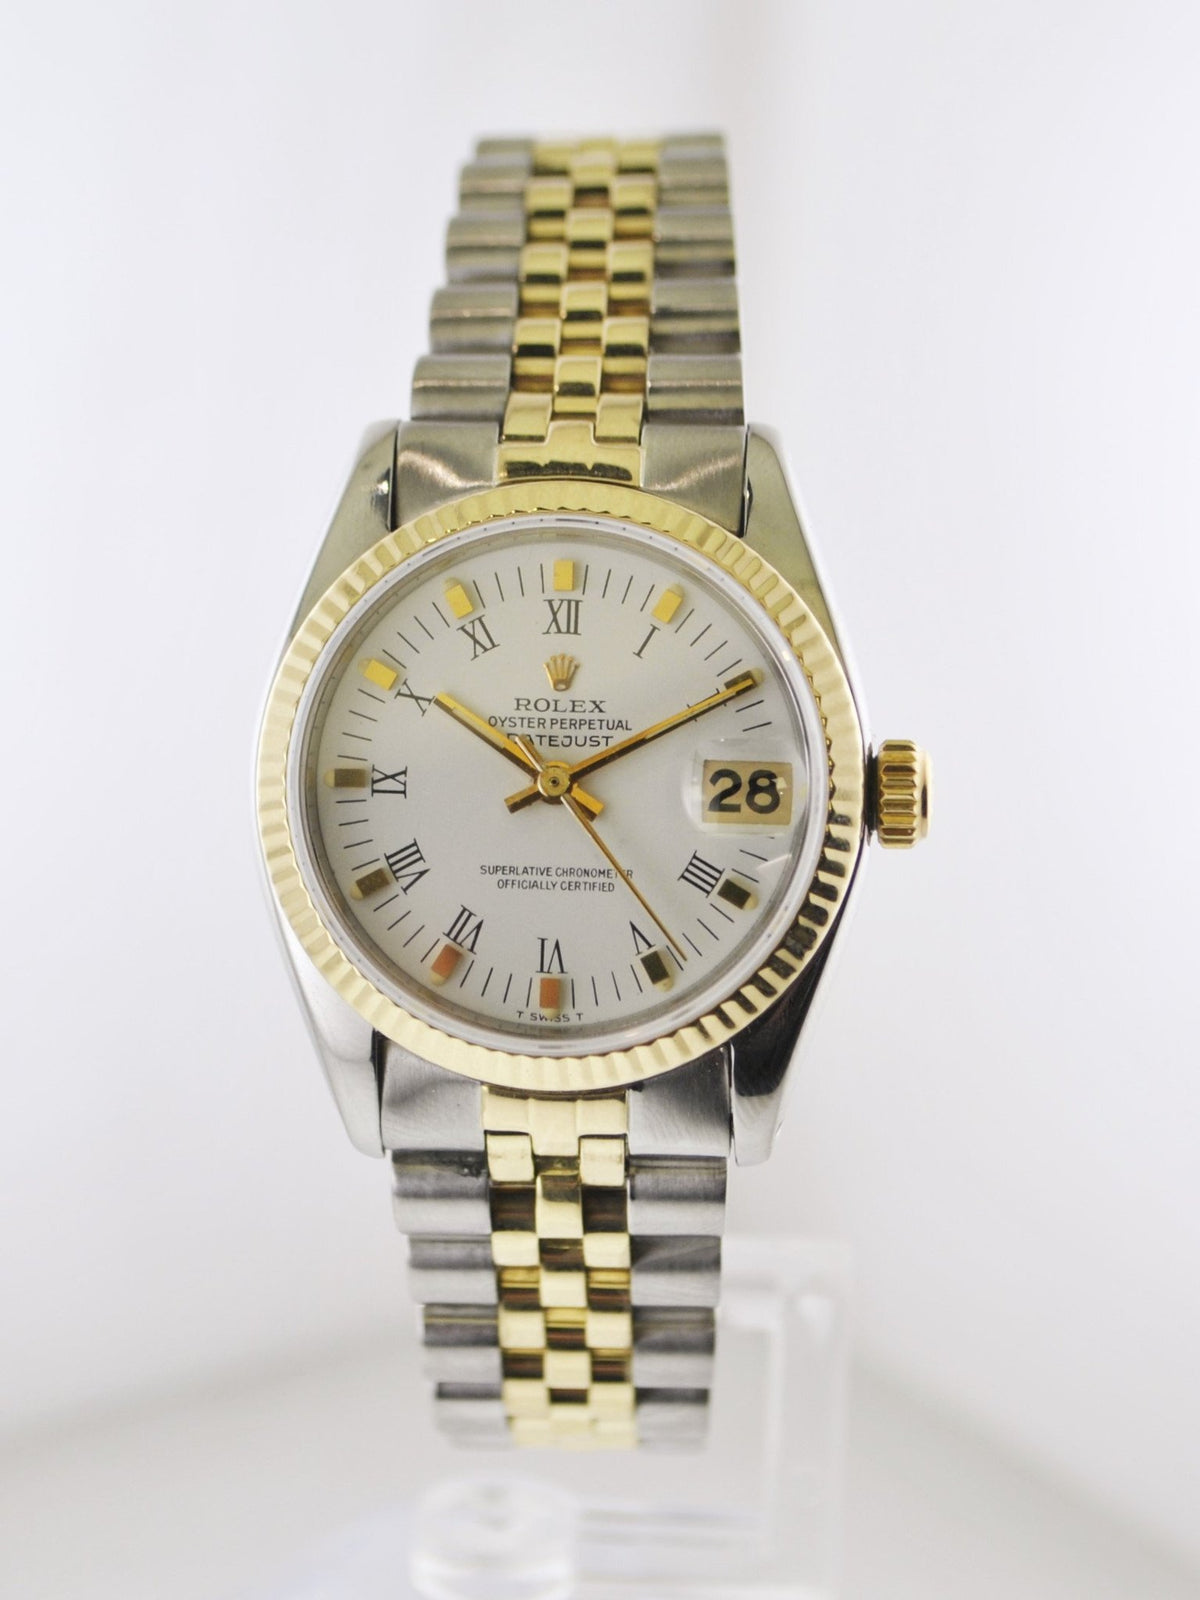 An Incredible History: Rolex